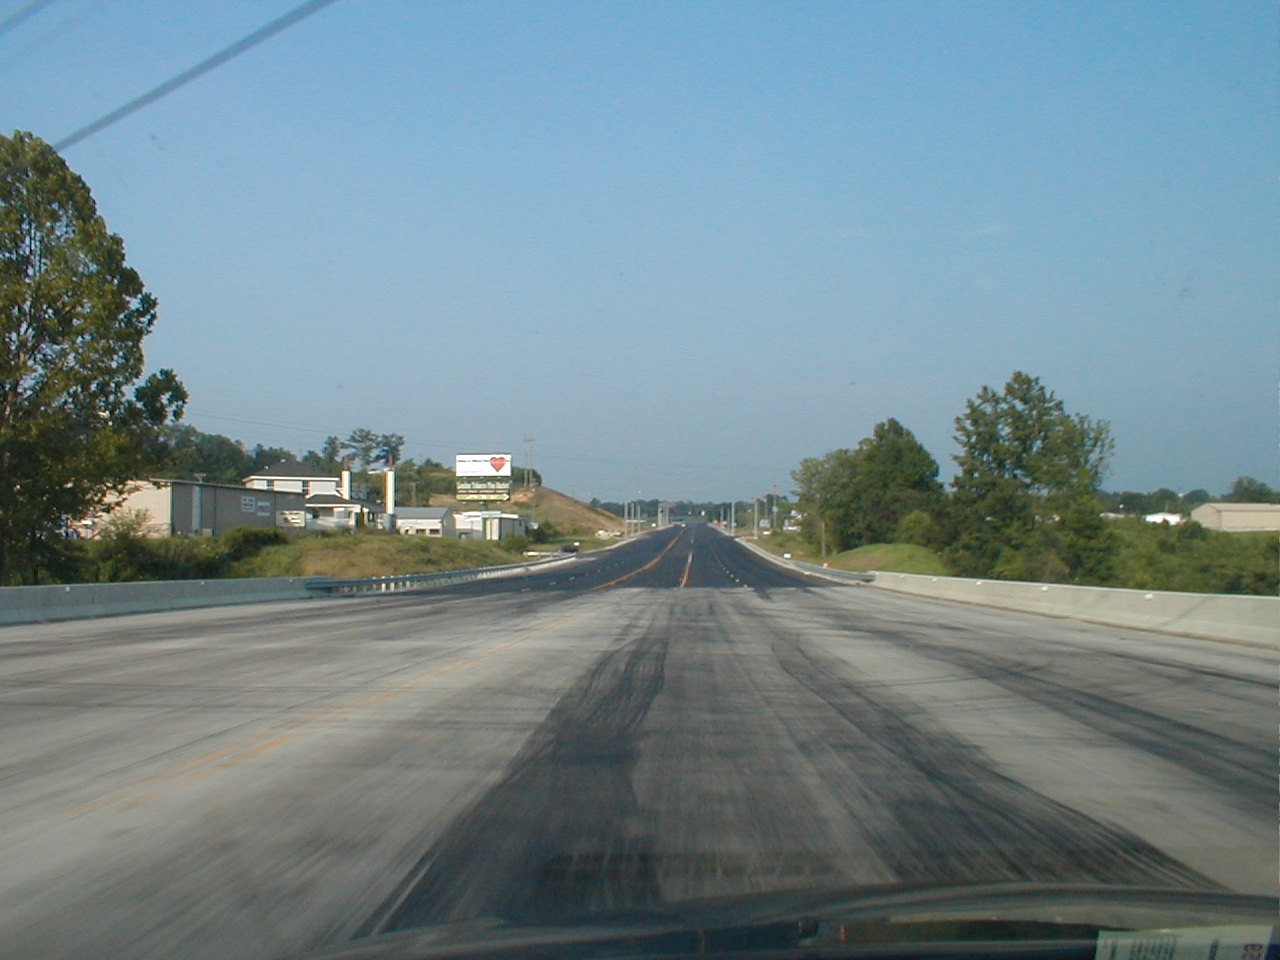 The western end of the parkway has been recently reconstructed.